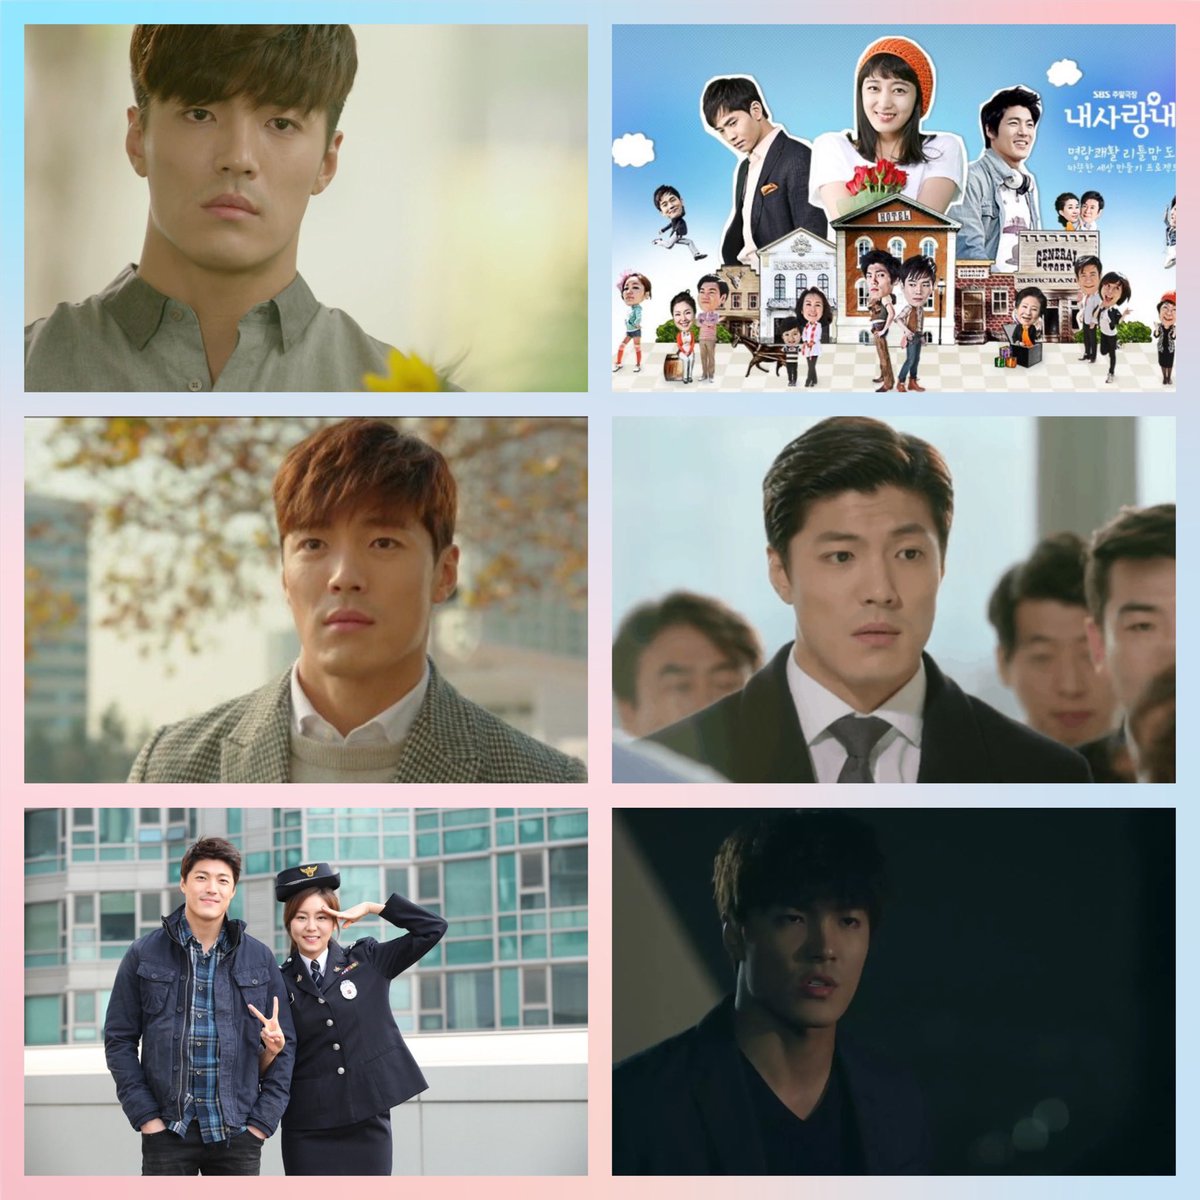 🤞#LeeJaeyoon’s appearance on #Physical100 will open up new opportunities for him. Behold, my favorite performances of him in no particular order - #AnotherOhHaeYoung, #MyLoveByMySide, #WeightliftingFairyKimBokjoo, #RevolutionaryLove, #GoldenRainbow and #HeartlessCity.